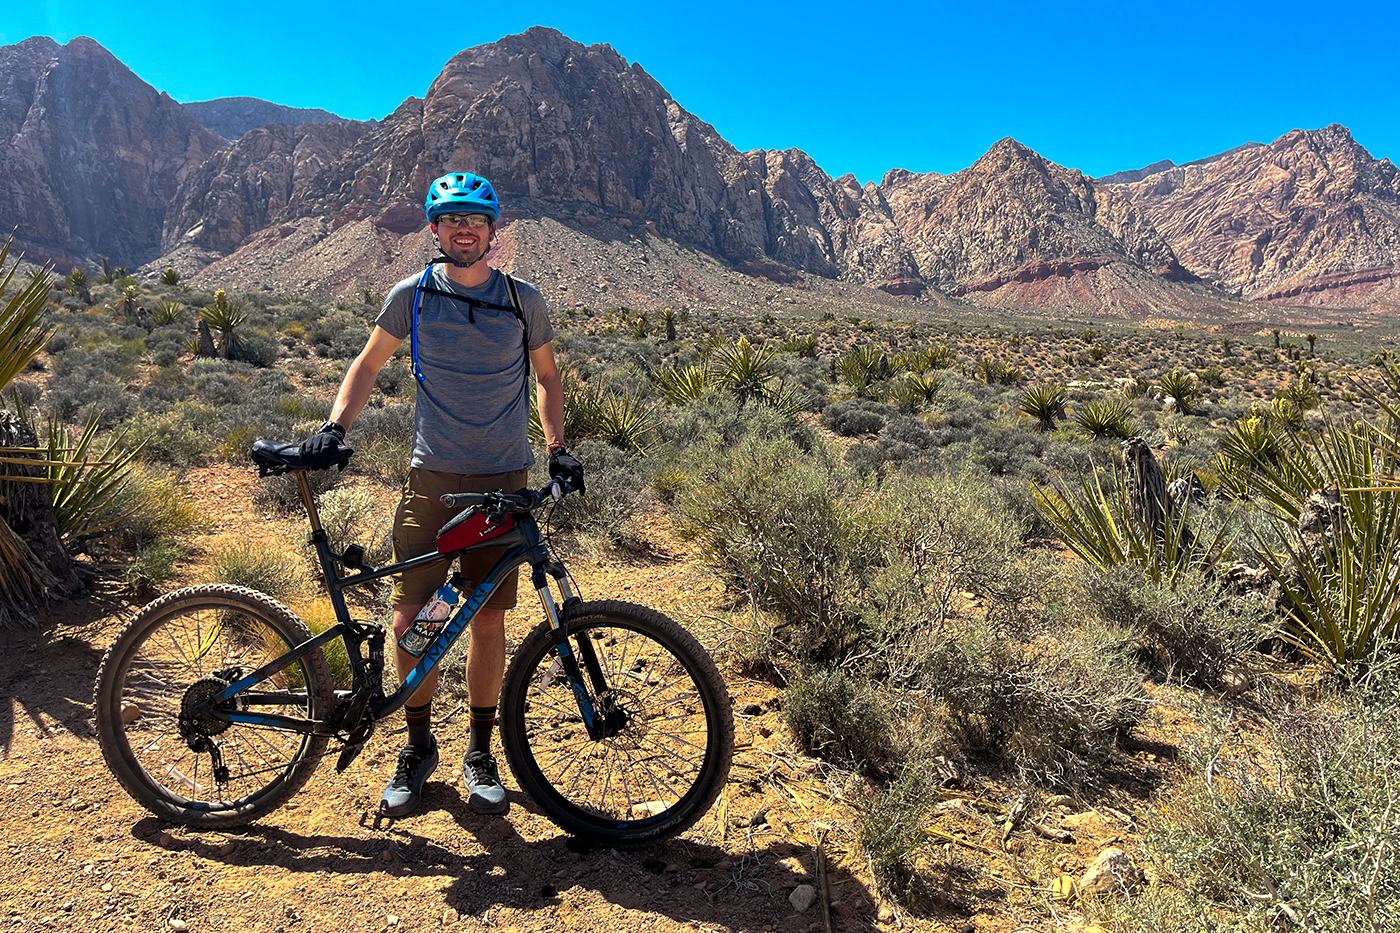 Michael Nelson stands by a bicycle with mountains in the background.